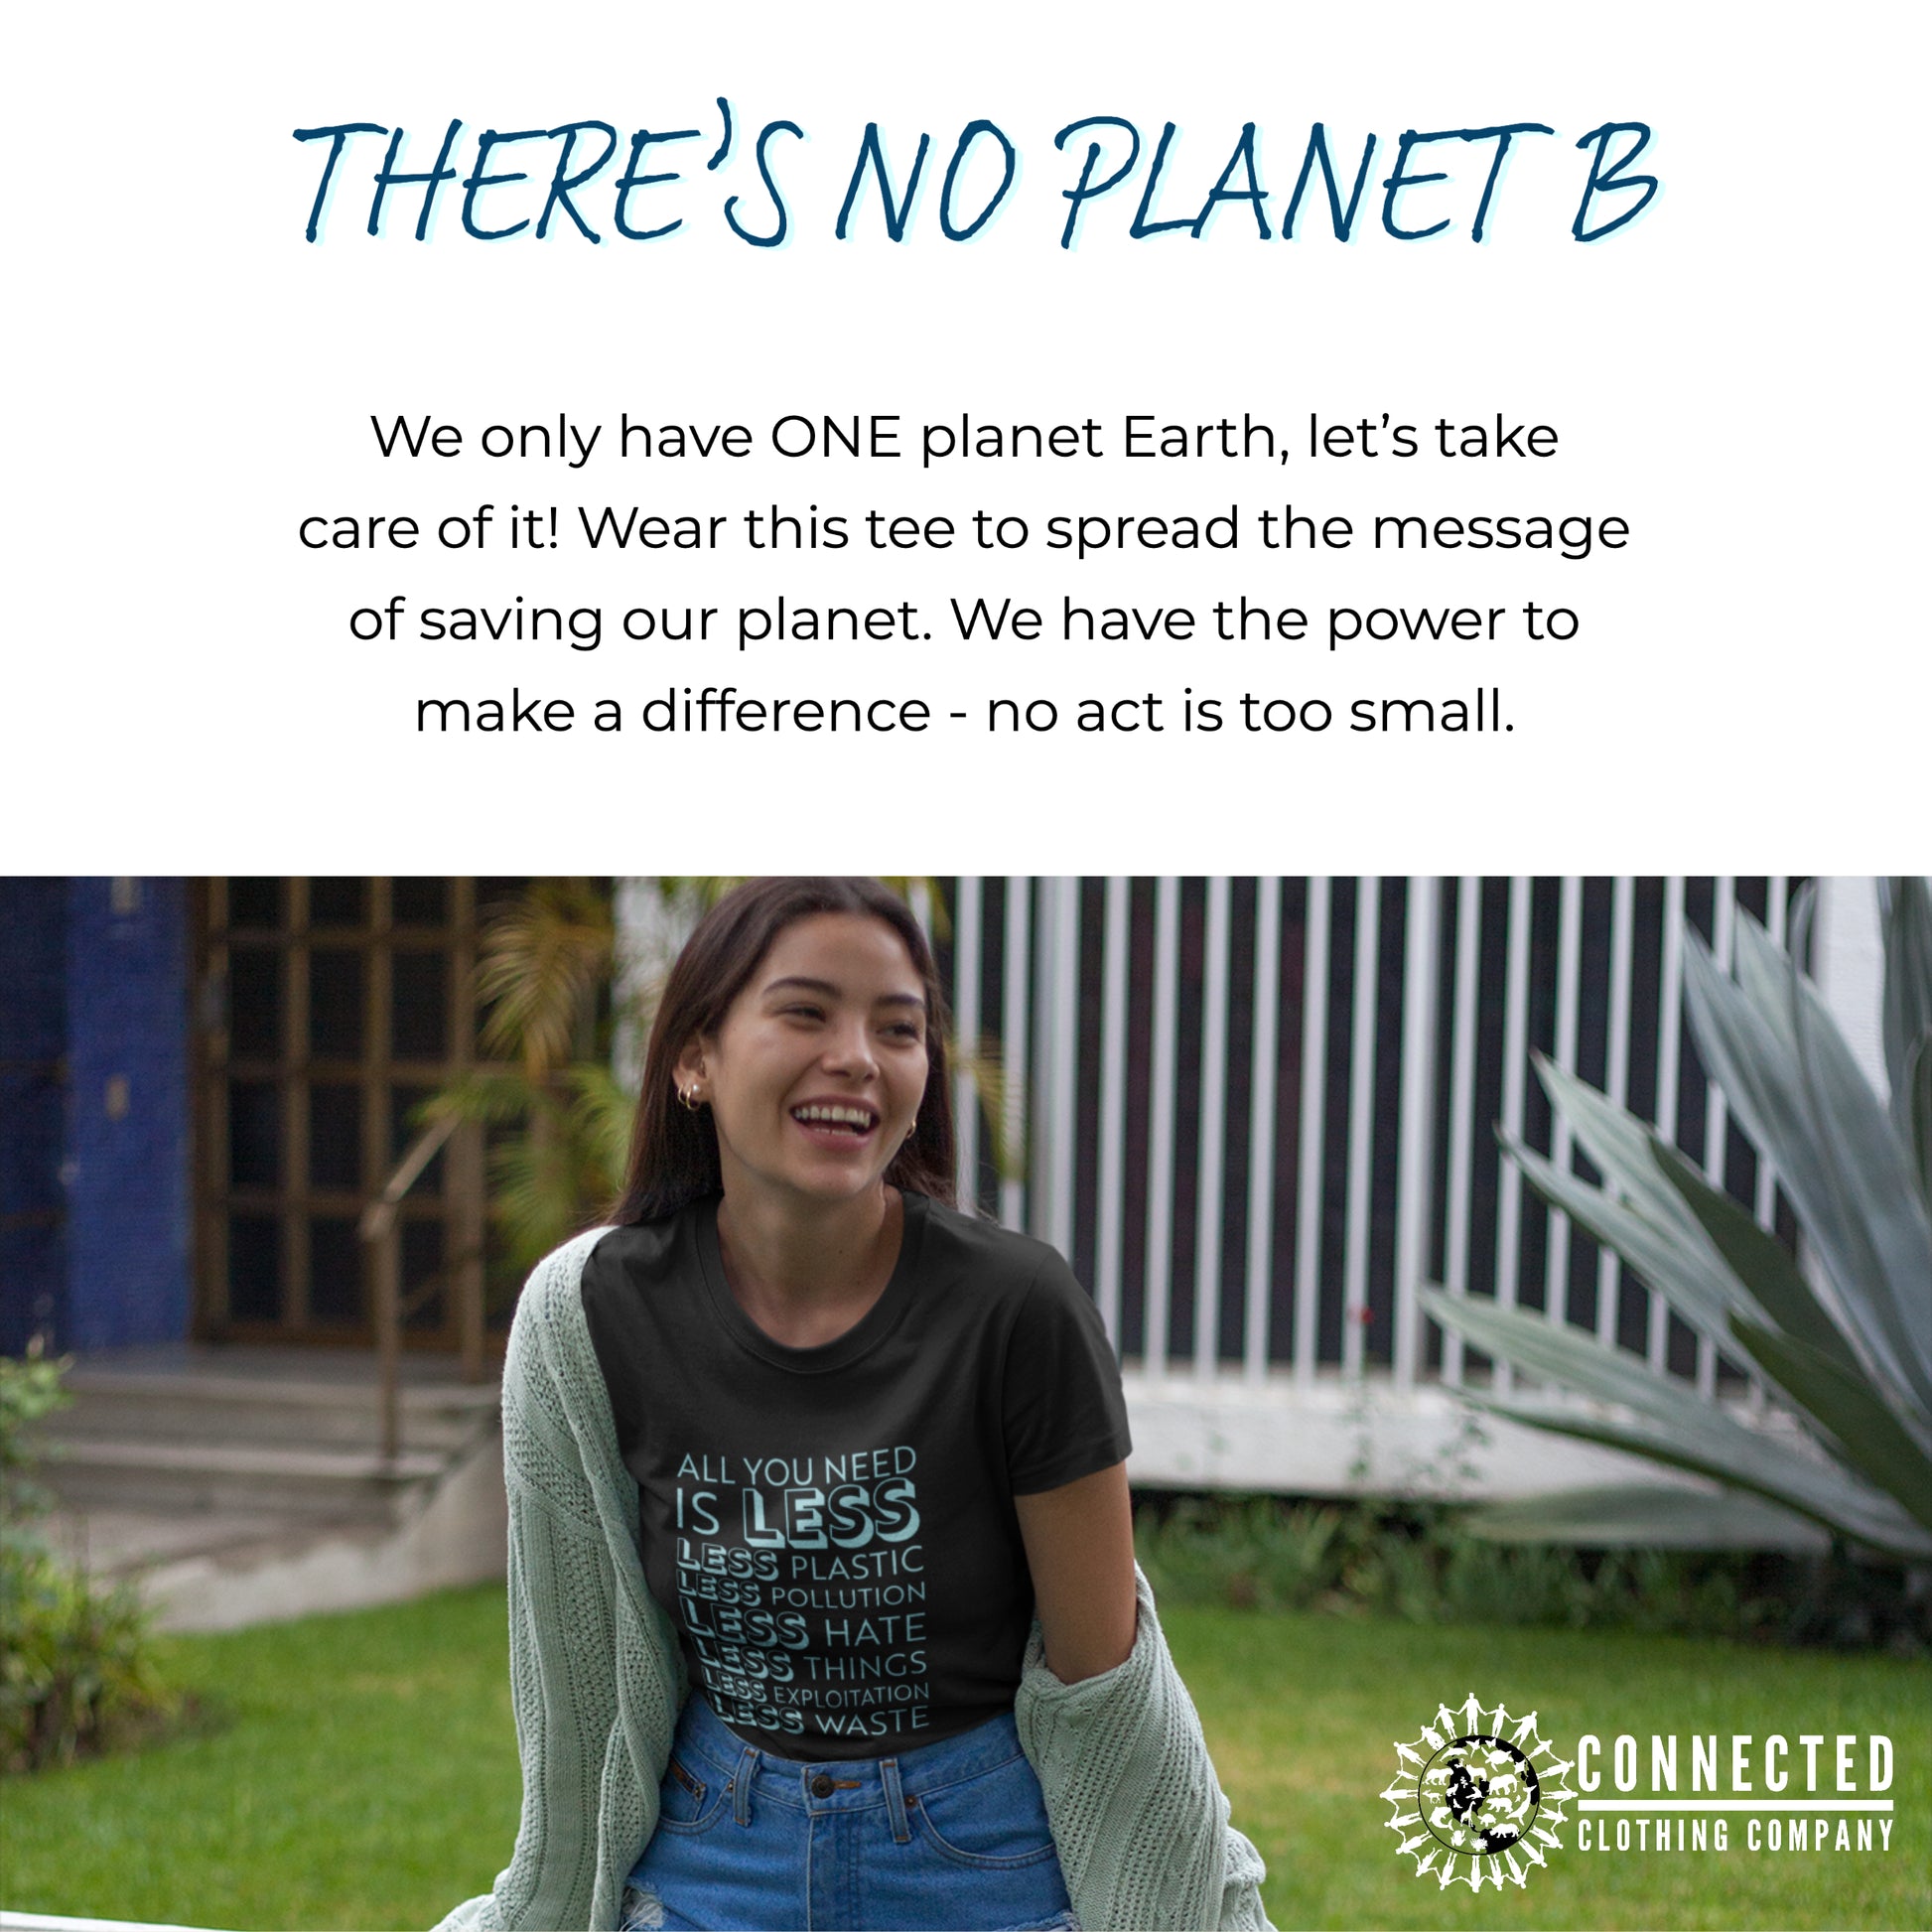 There's no planet B. We only have one planet Earth, let's take care of it! Wear this tee to spread the message of saving our planet. We have the power to make a difference - no act is too small.